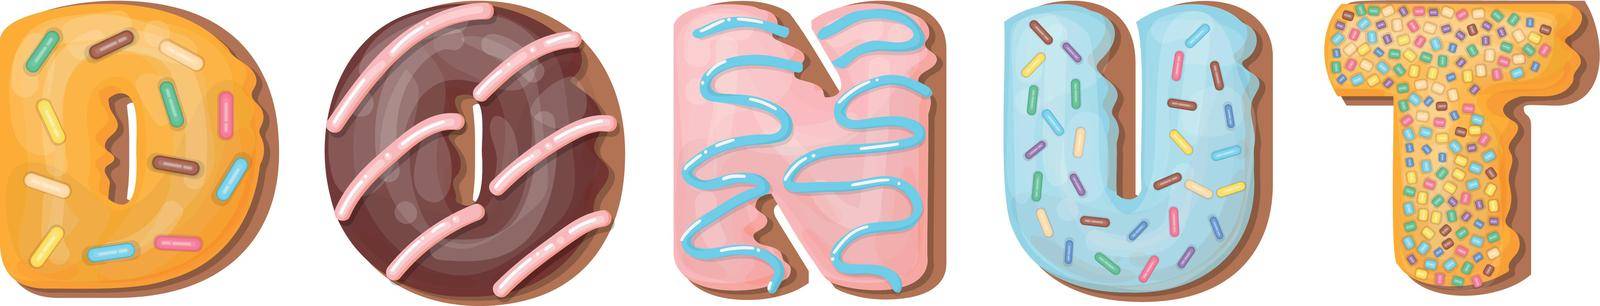 Donut text in sweet food style with glazing and sprinkles. Decorative heading by LadadikArt